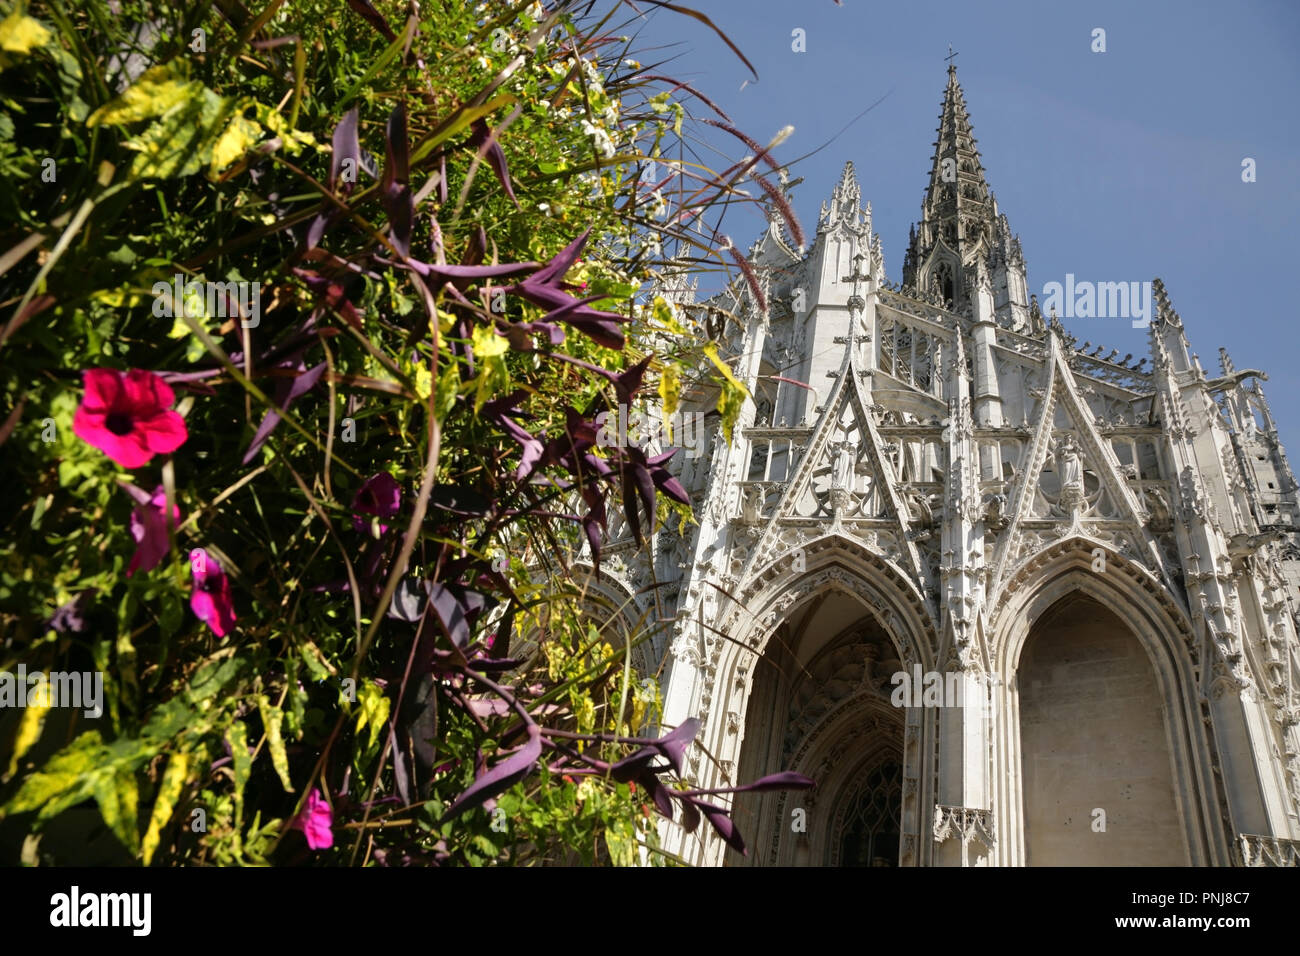 Church Of Saint Maclou Rouen France Built In The Flamboyant Style Of Gothic Architecture Stock Photo Alamy